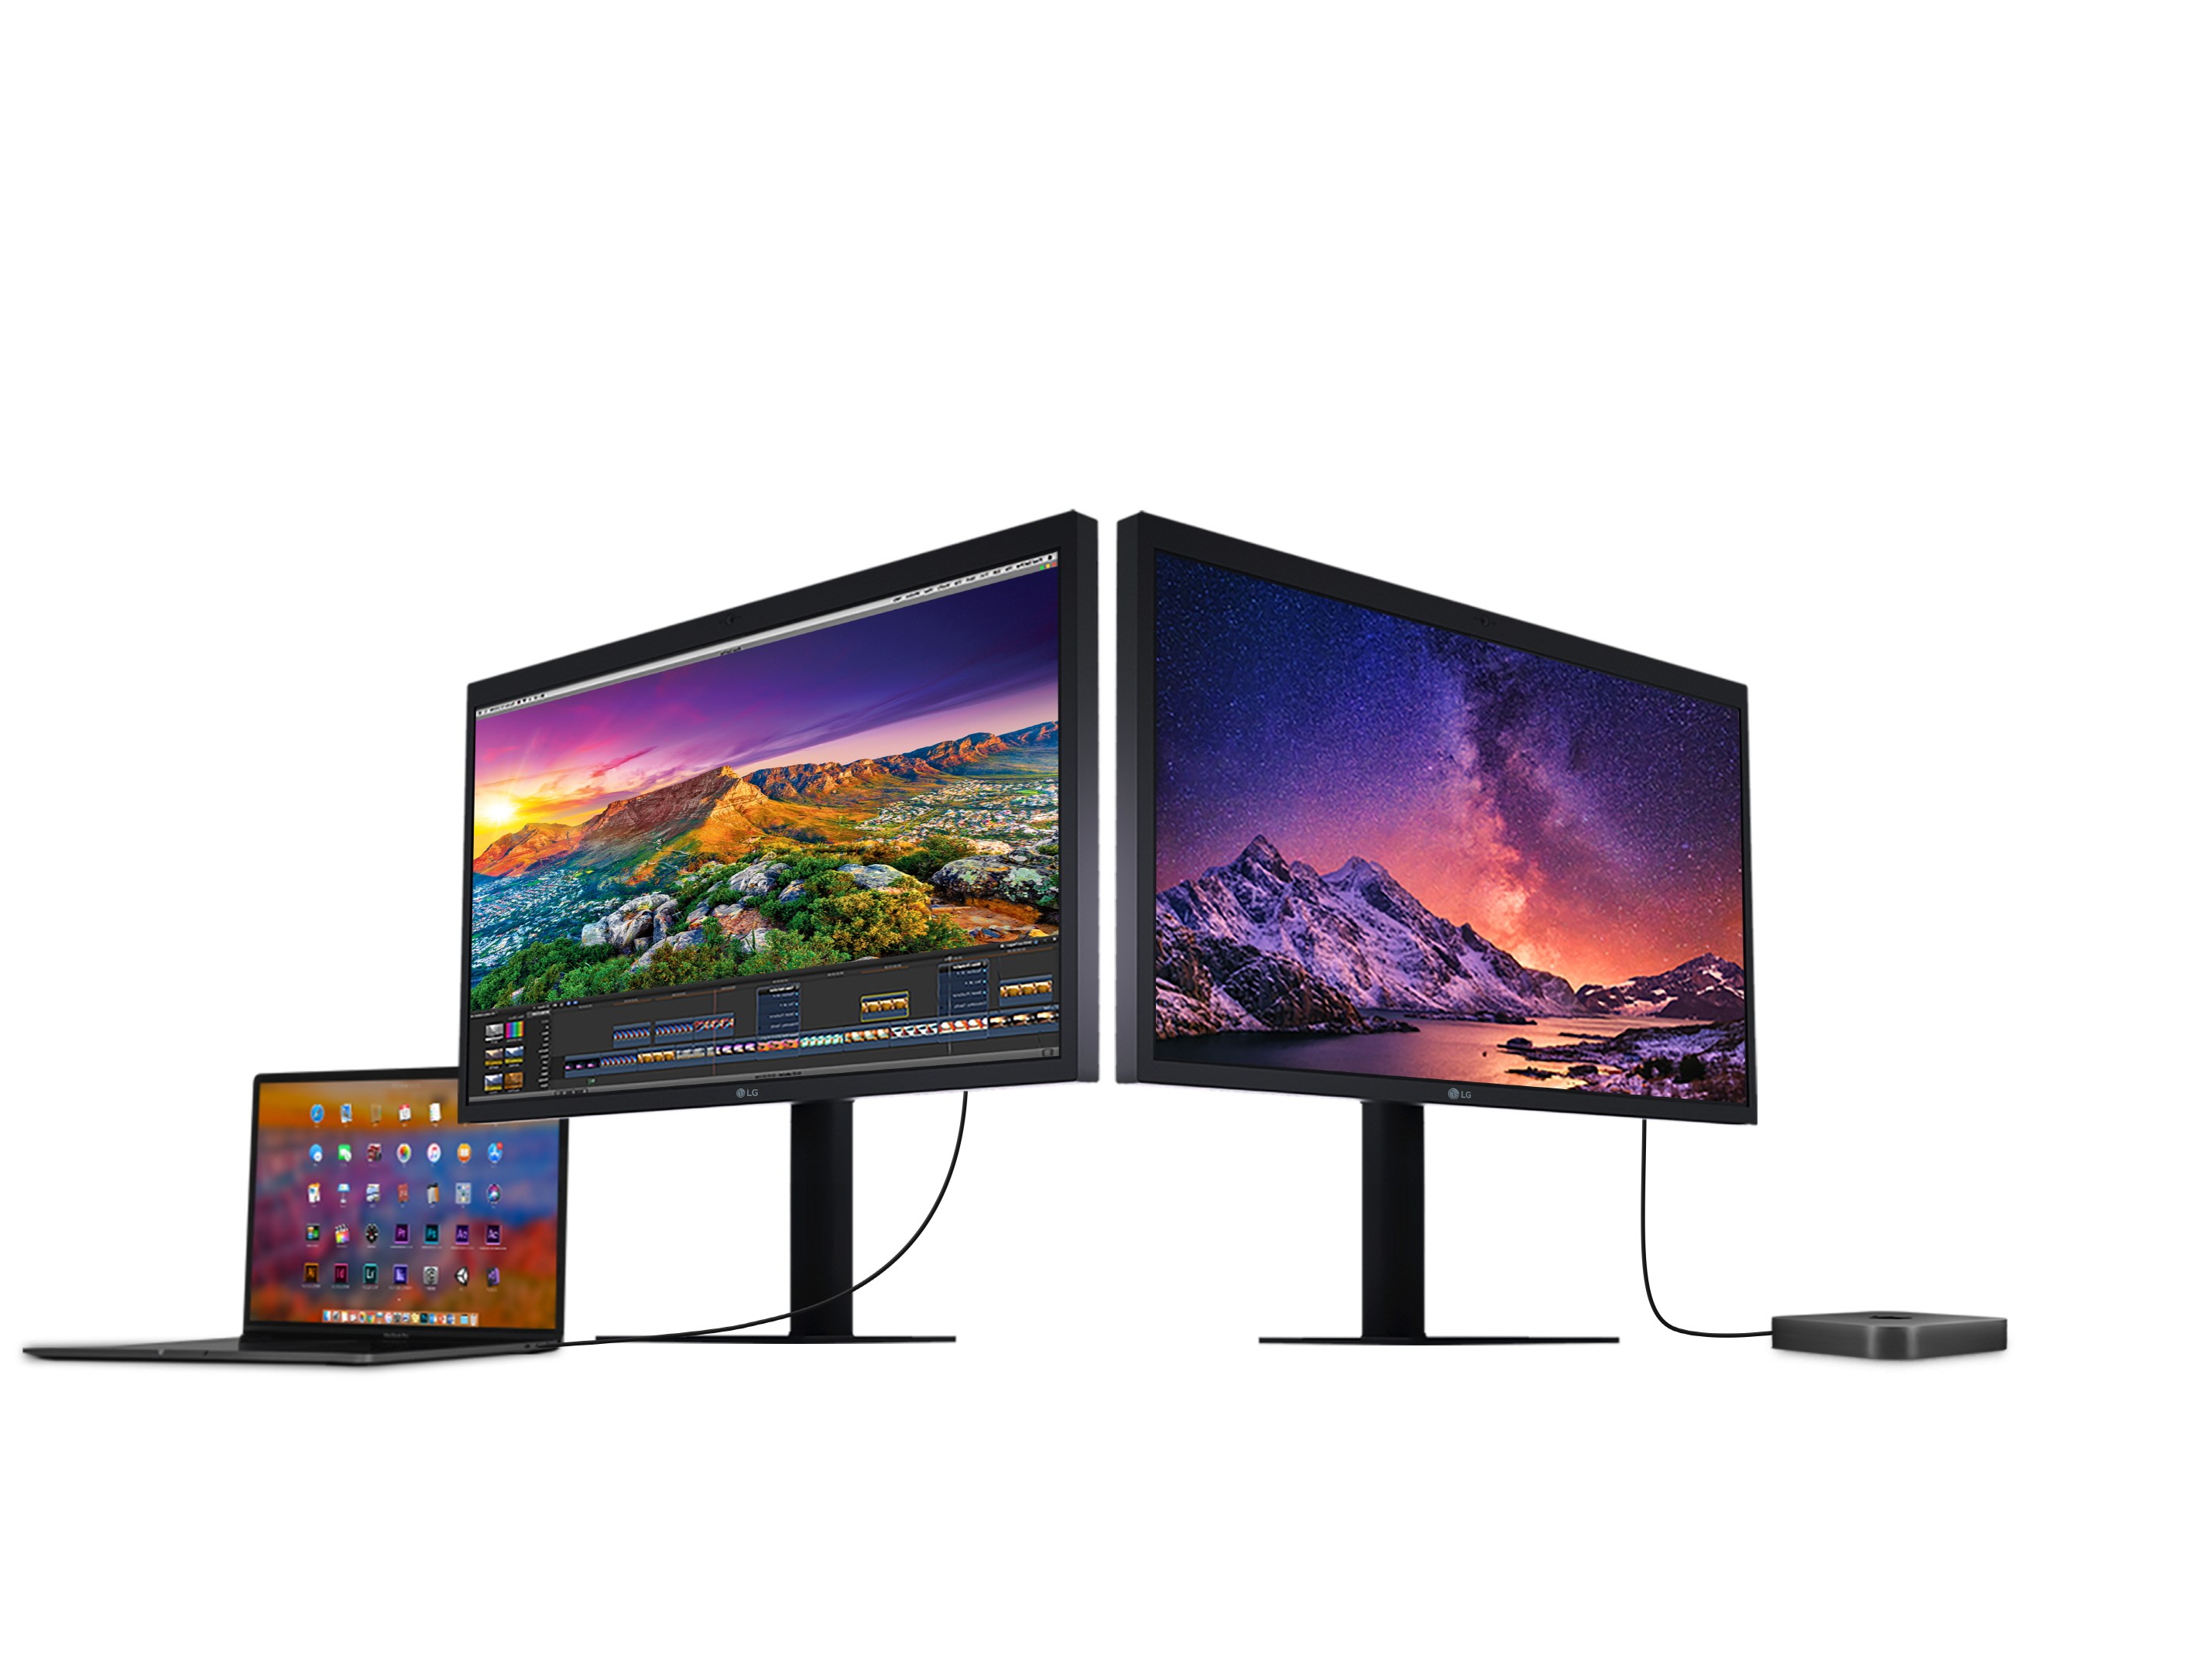 A right and left-side view of the LG UltraFine 5K, one connected to a laptop and the other connected to a device